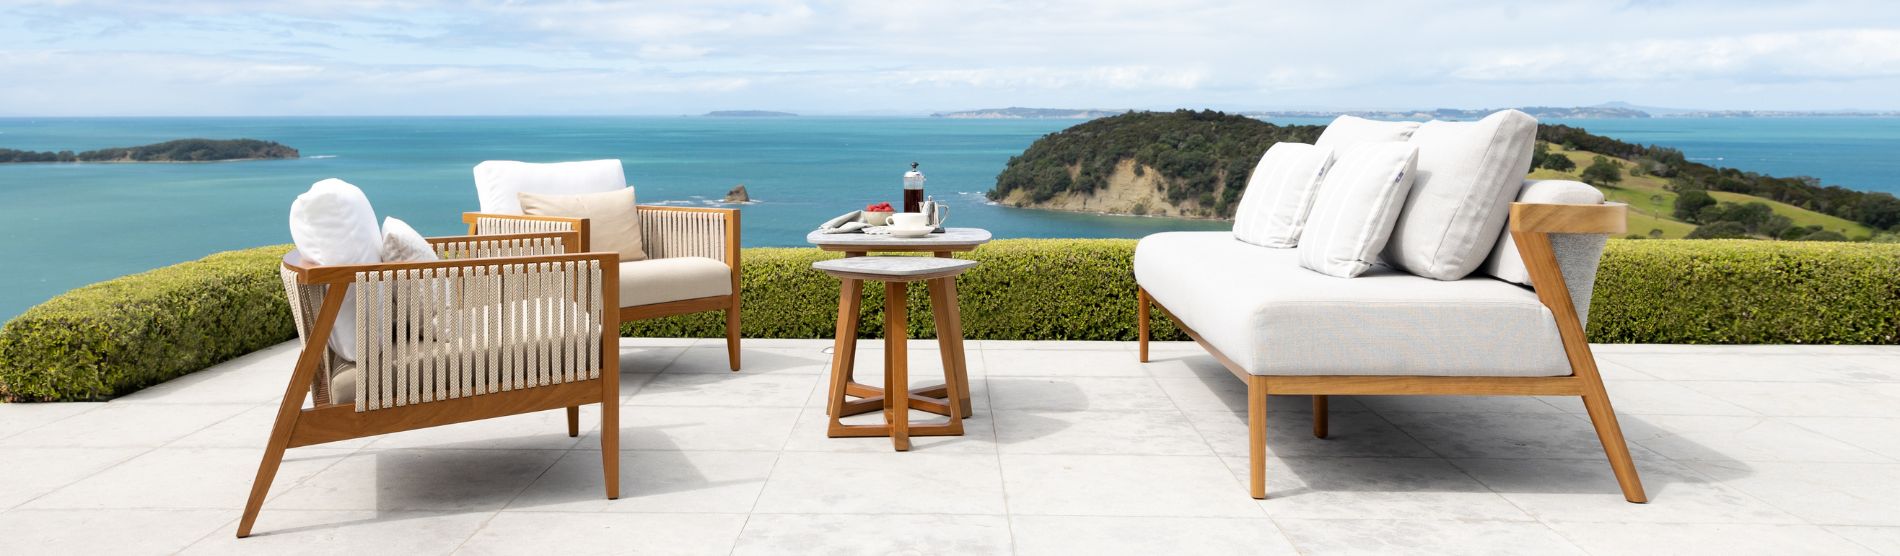 outdoor sofa, tables and chairs on terrace in New Zealand coast